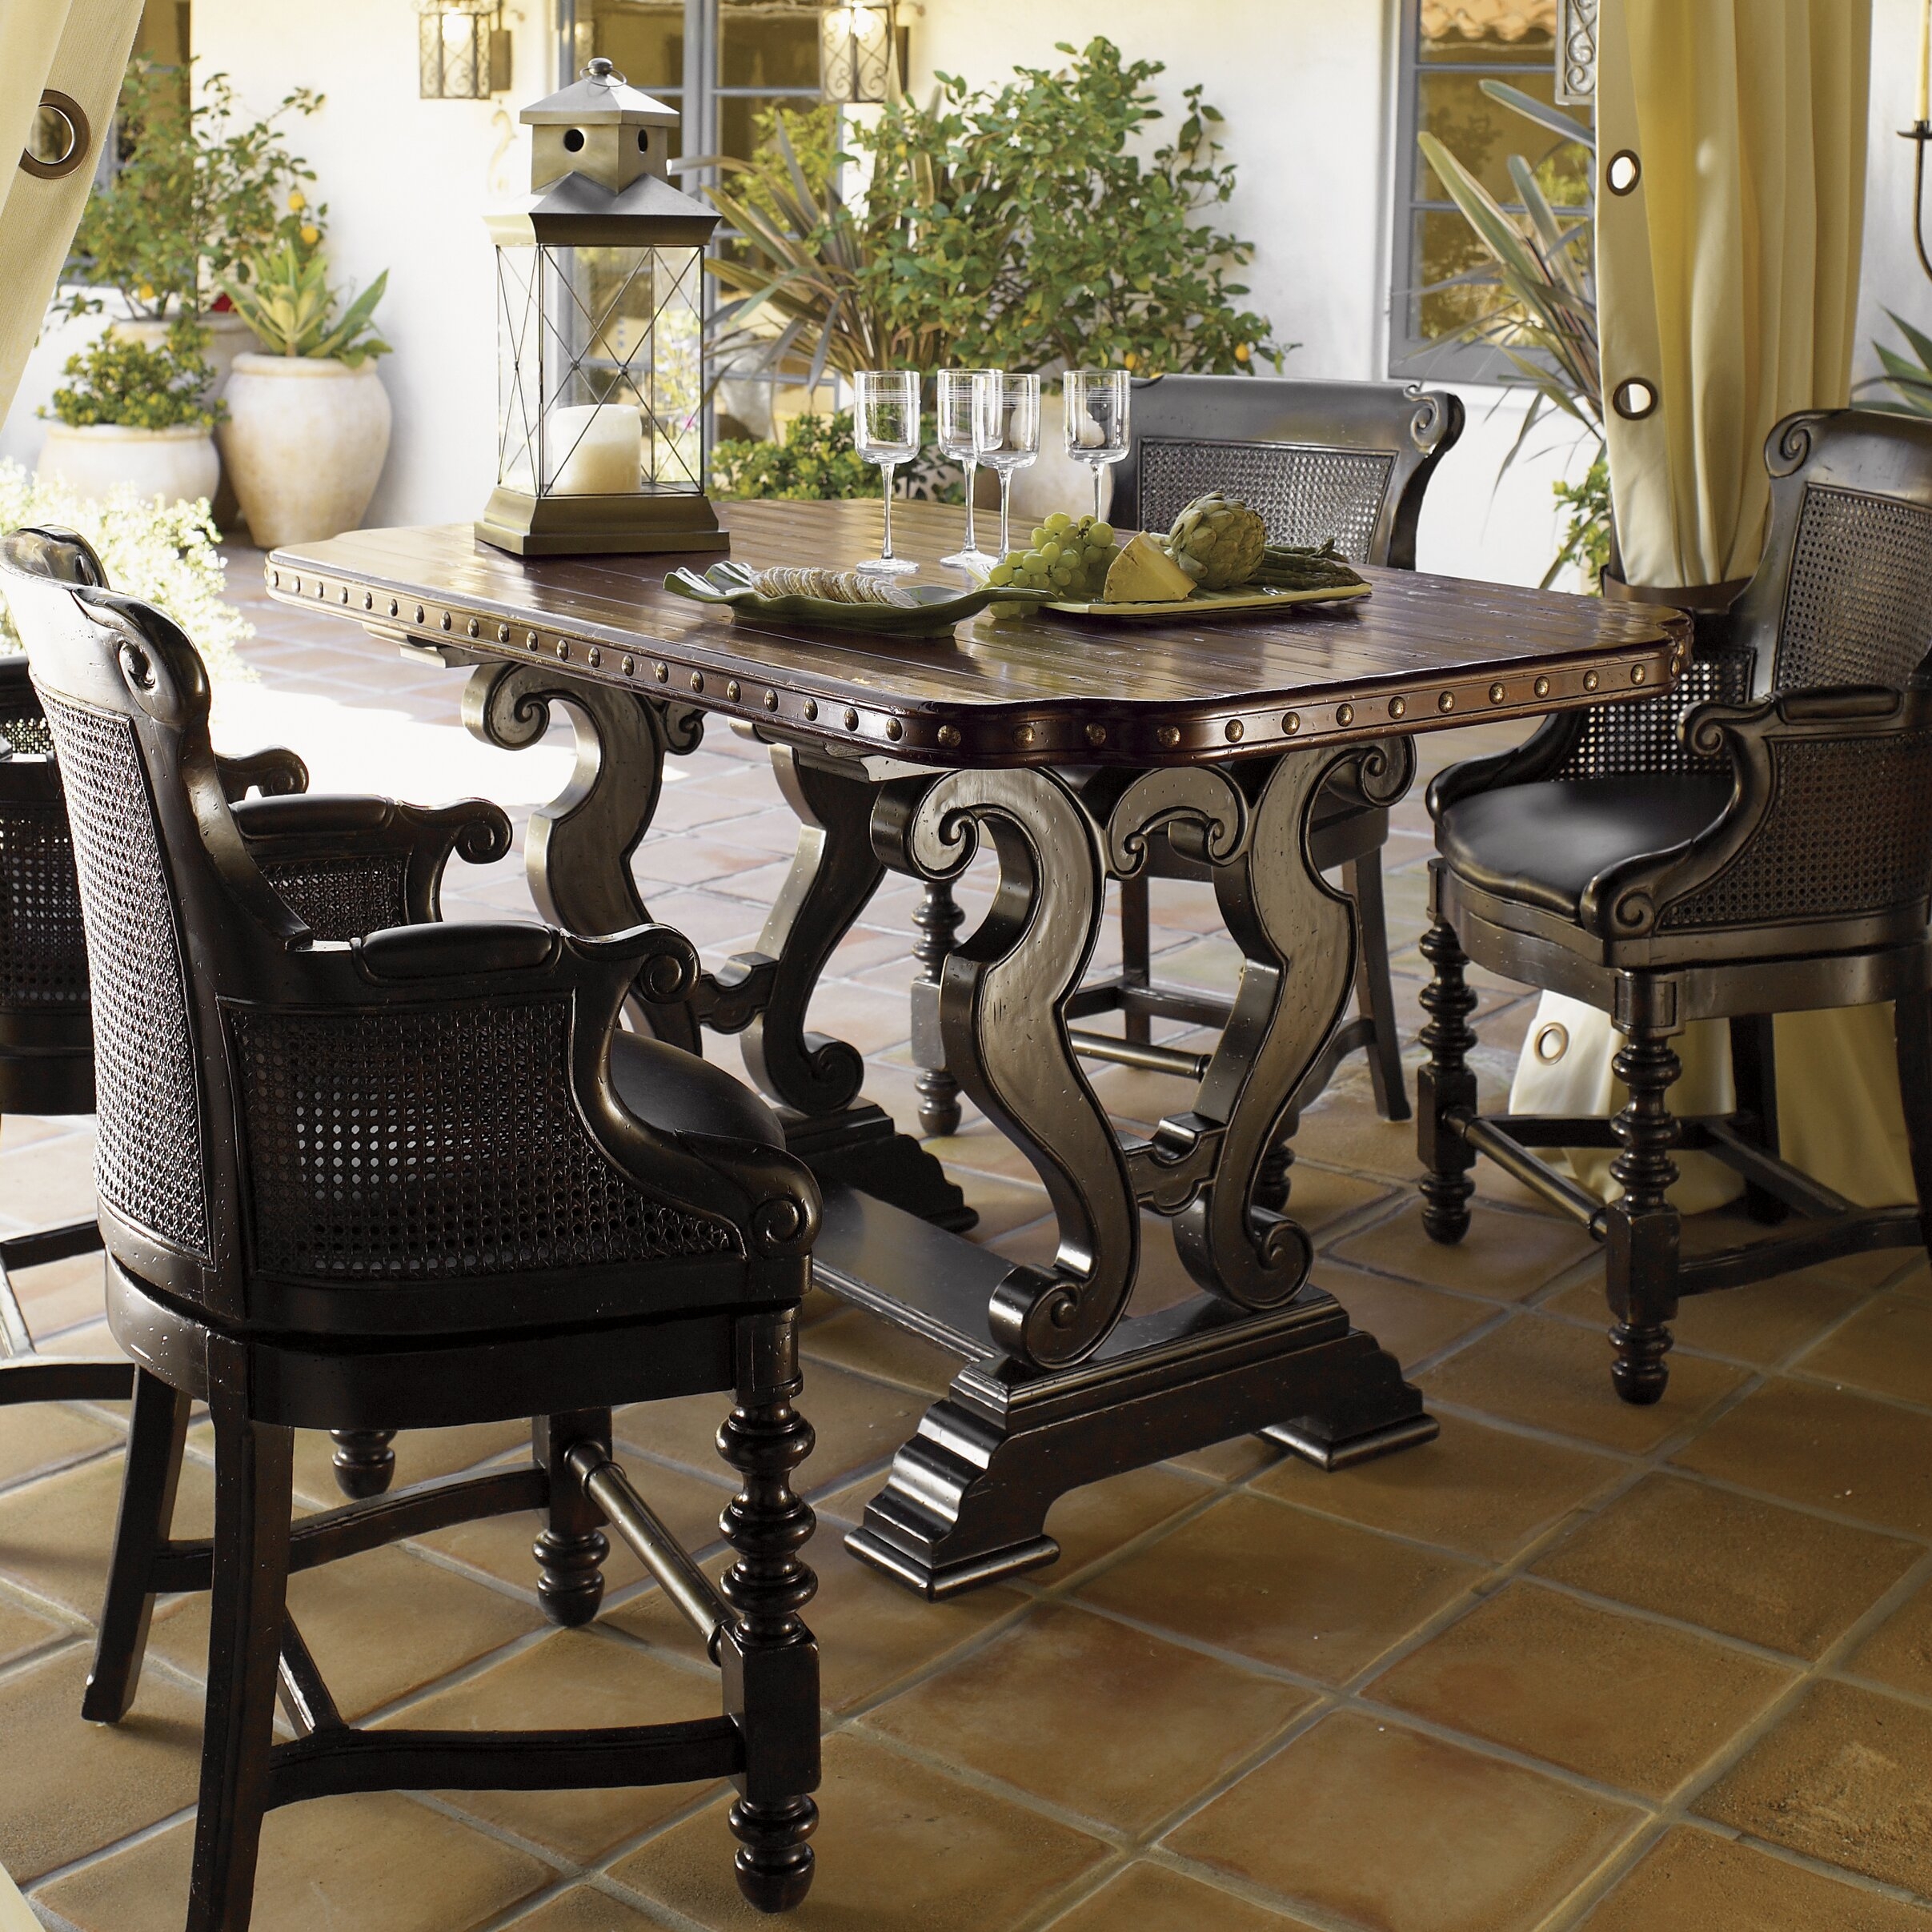 Kingstown Sienna Bistro Dining Table